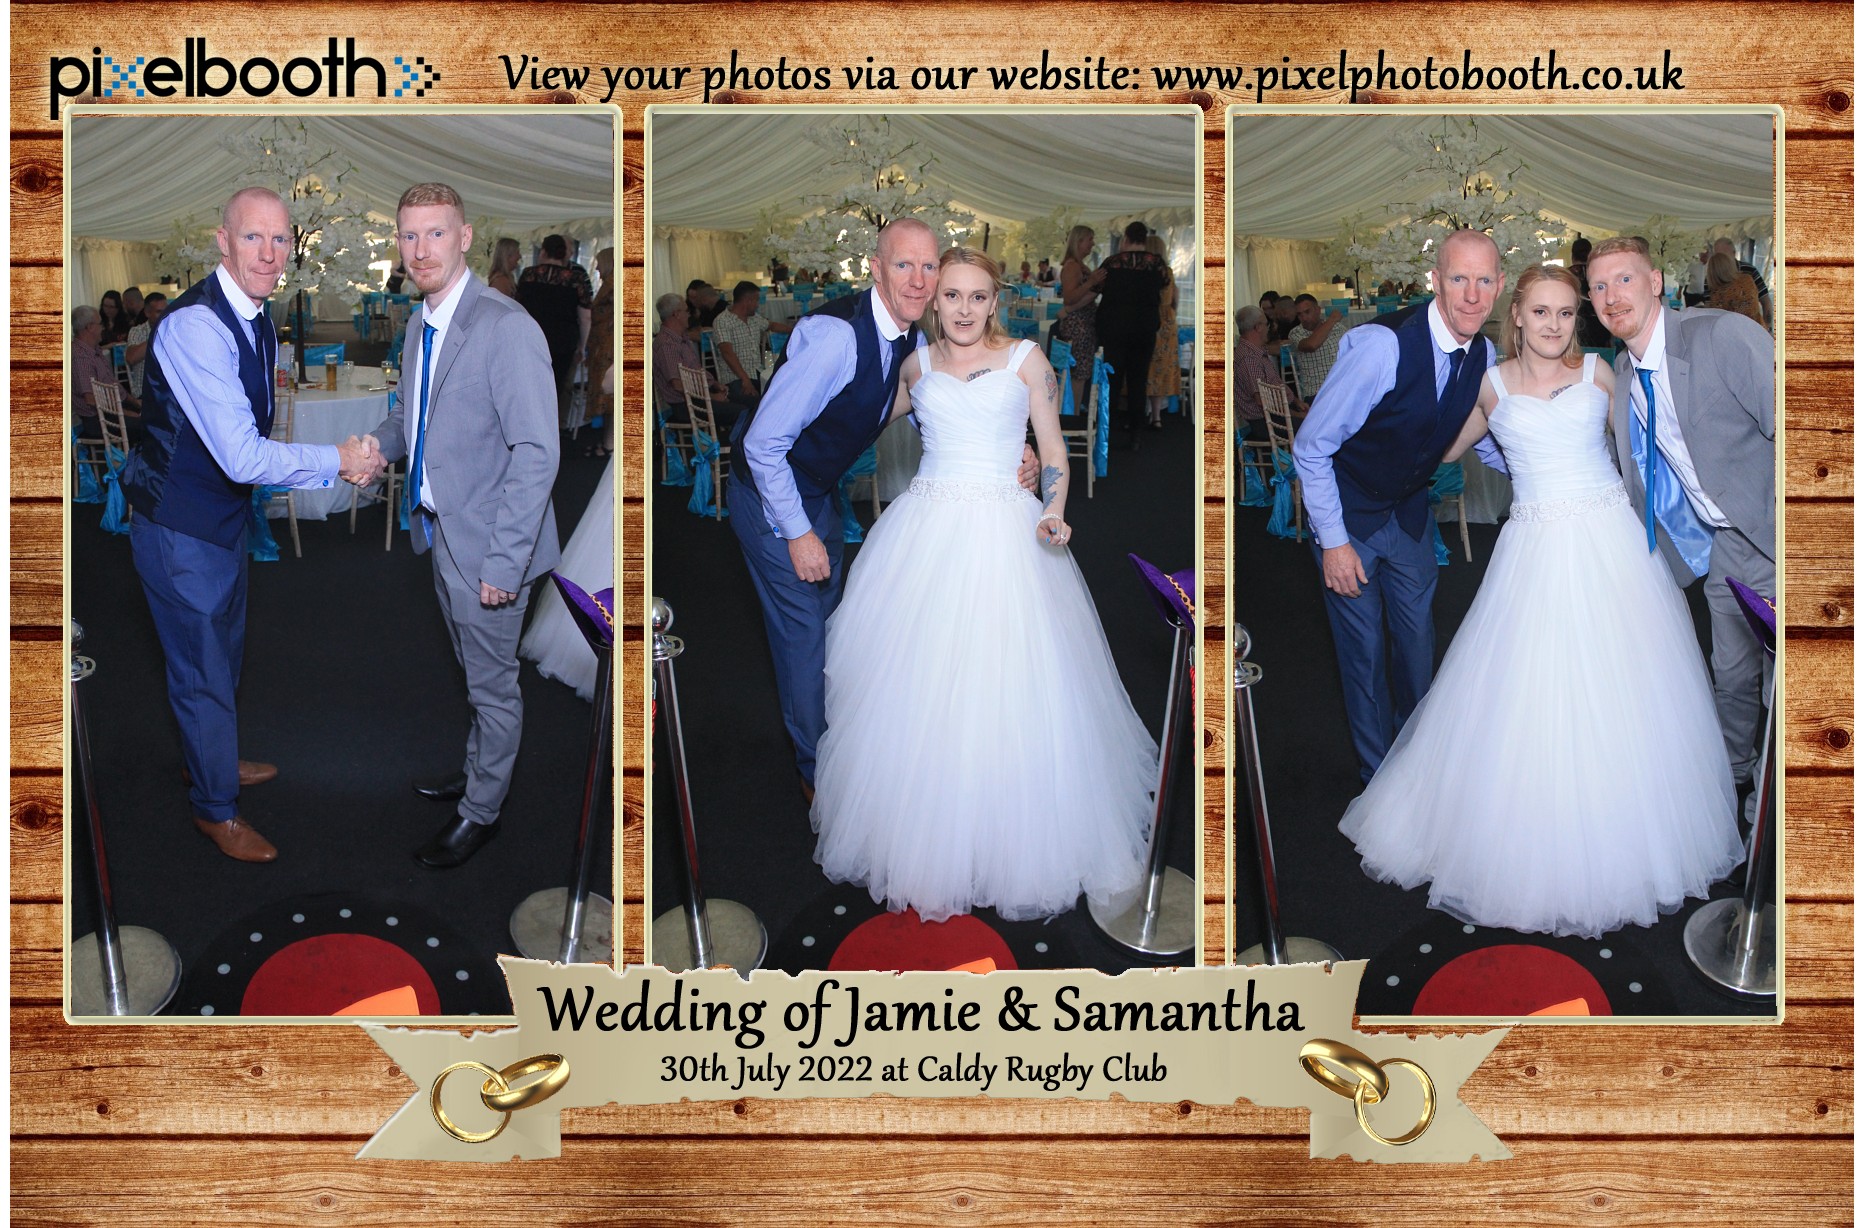 30th July 2022: Samantha and Jamie's Wedding at Caldy Rugby Club